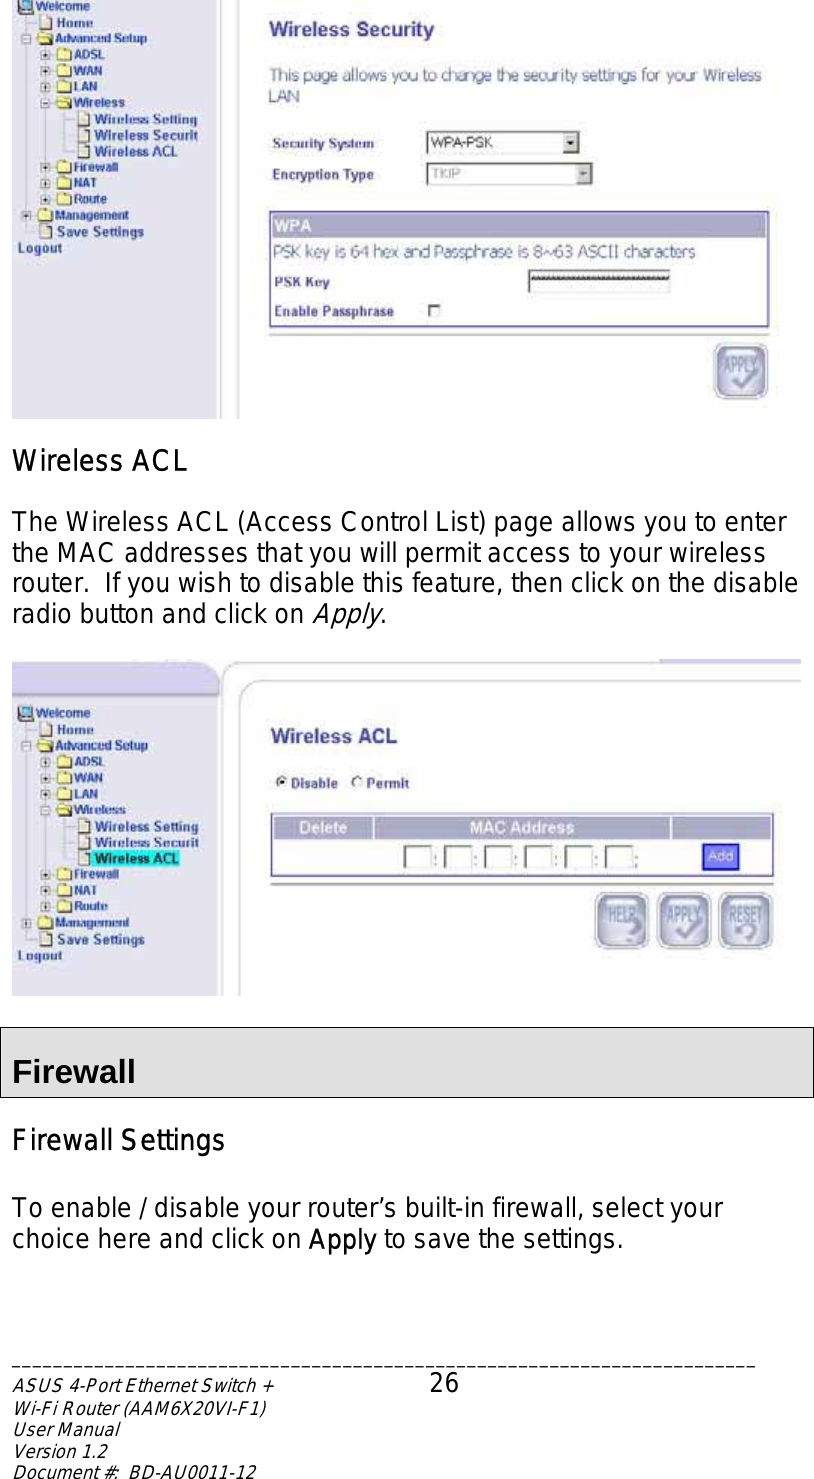  Wireless ACL  The Wireless ACL (Access Control List) page allows you to enter the MAC addresses that you will permit access to your wireless router.  If you wish to disable this feature, then click on the disable radio button and click on Apply.    Firewall Firewall Settings  To enable / disable your router’s built-in firewall, select your choice here and click on Apply to save the settings.  ________________________________________________________________________ASUS 4-Port Ethernet Switch +  26 Wi-Fi Router (AAM6X20VI-F1) User Manual                                                                         Version 1.2 Document #:  BD-AU0011-12  